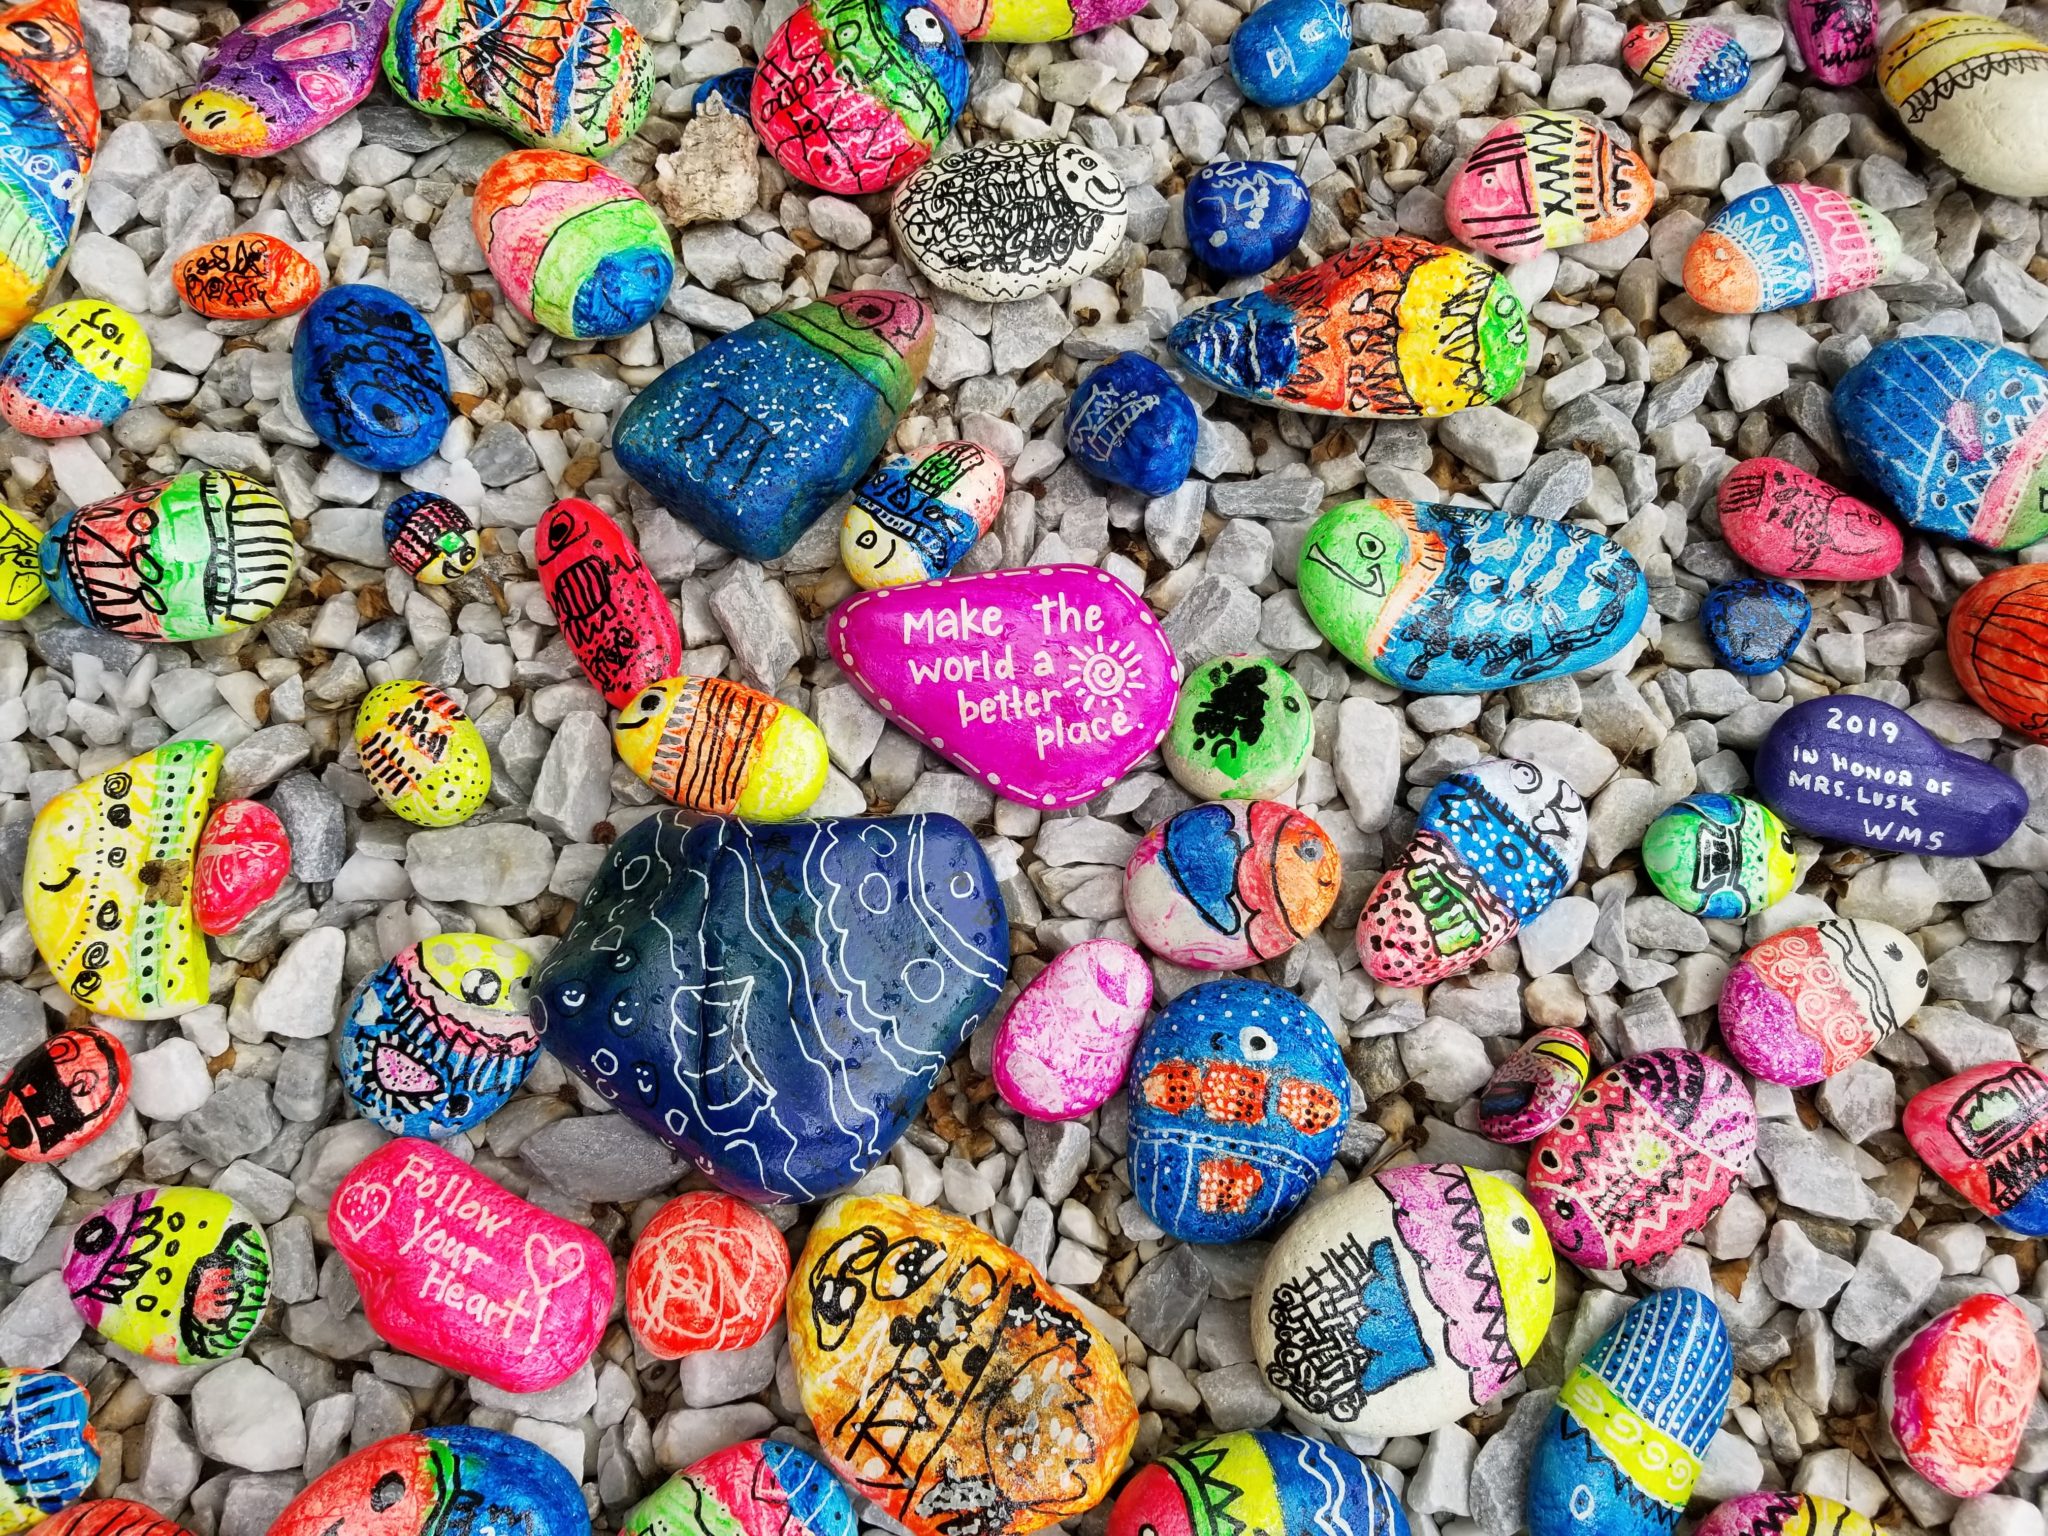 Painted rocks with messages of kindness